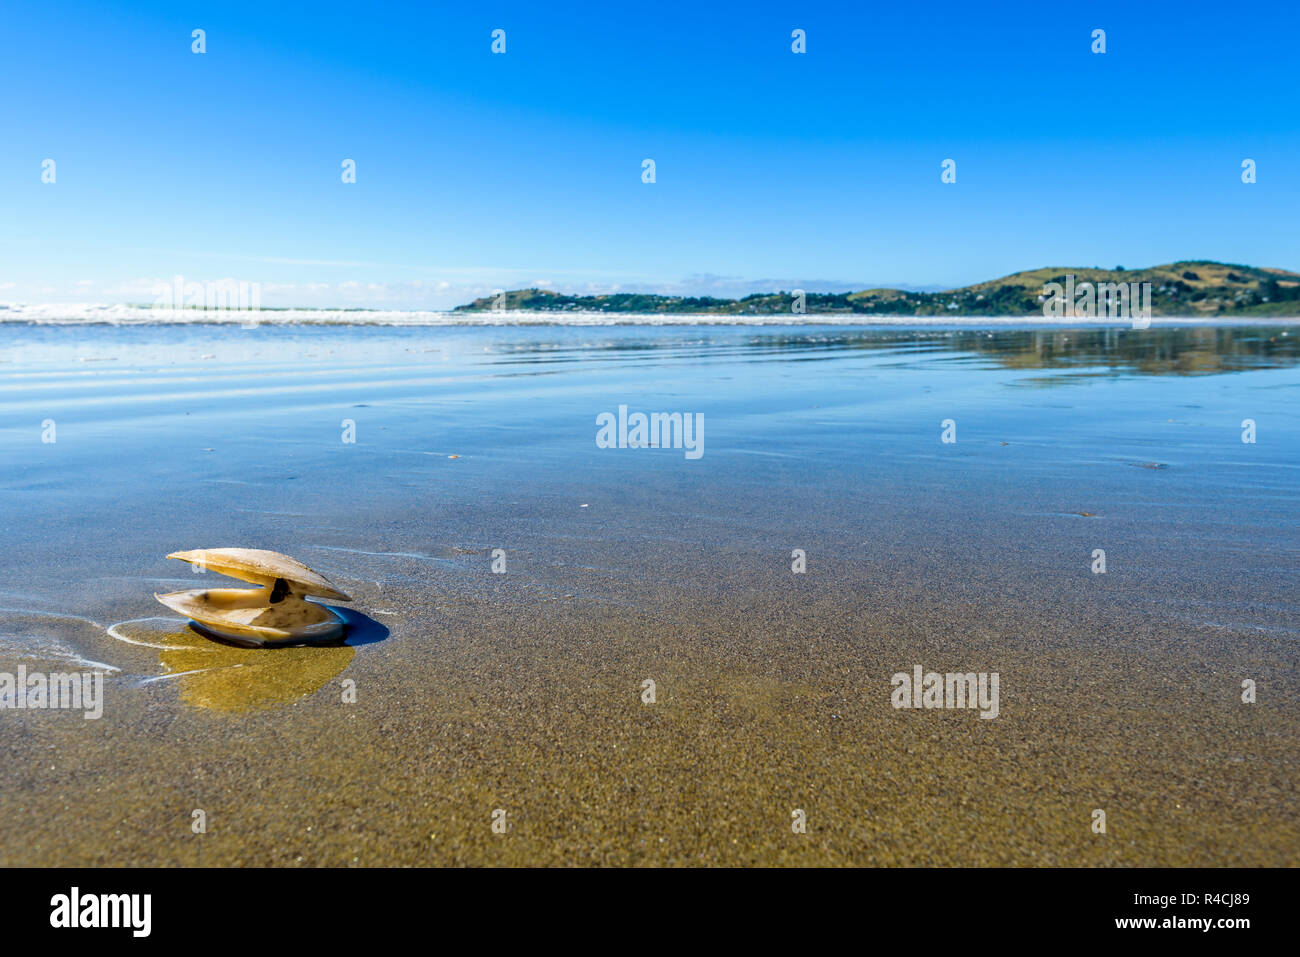 Beautiful deserted empty beach landscape with reflection of the sky on the water and close up of a shell. Moeraki Boulders, Koekohe beach, New Zealand Stock Photo